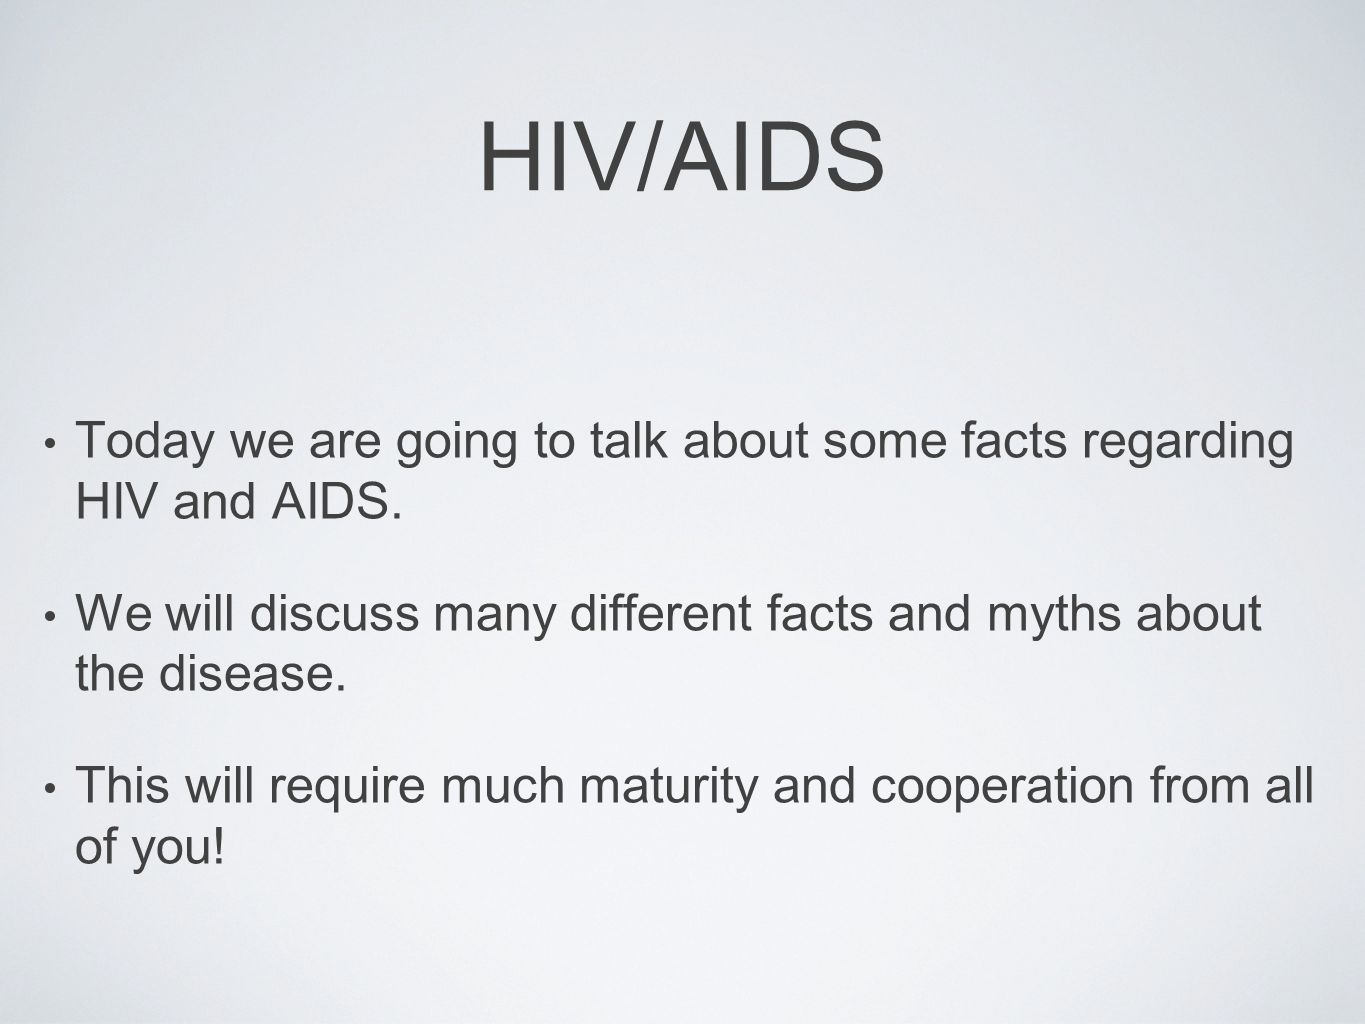 HIV/AIDS Today we are going to talk about some facts regarding HIV and AIDS. We will discuss many different facts and myths about the disease.